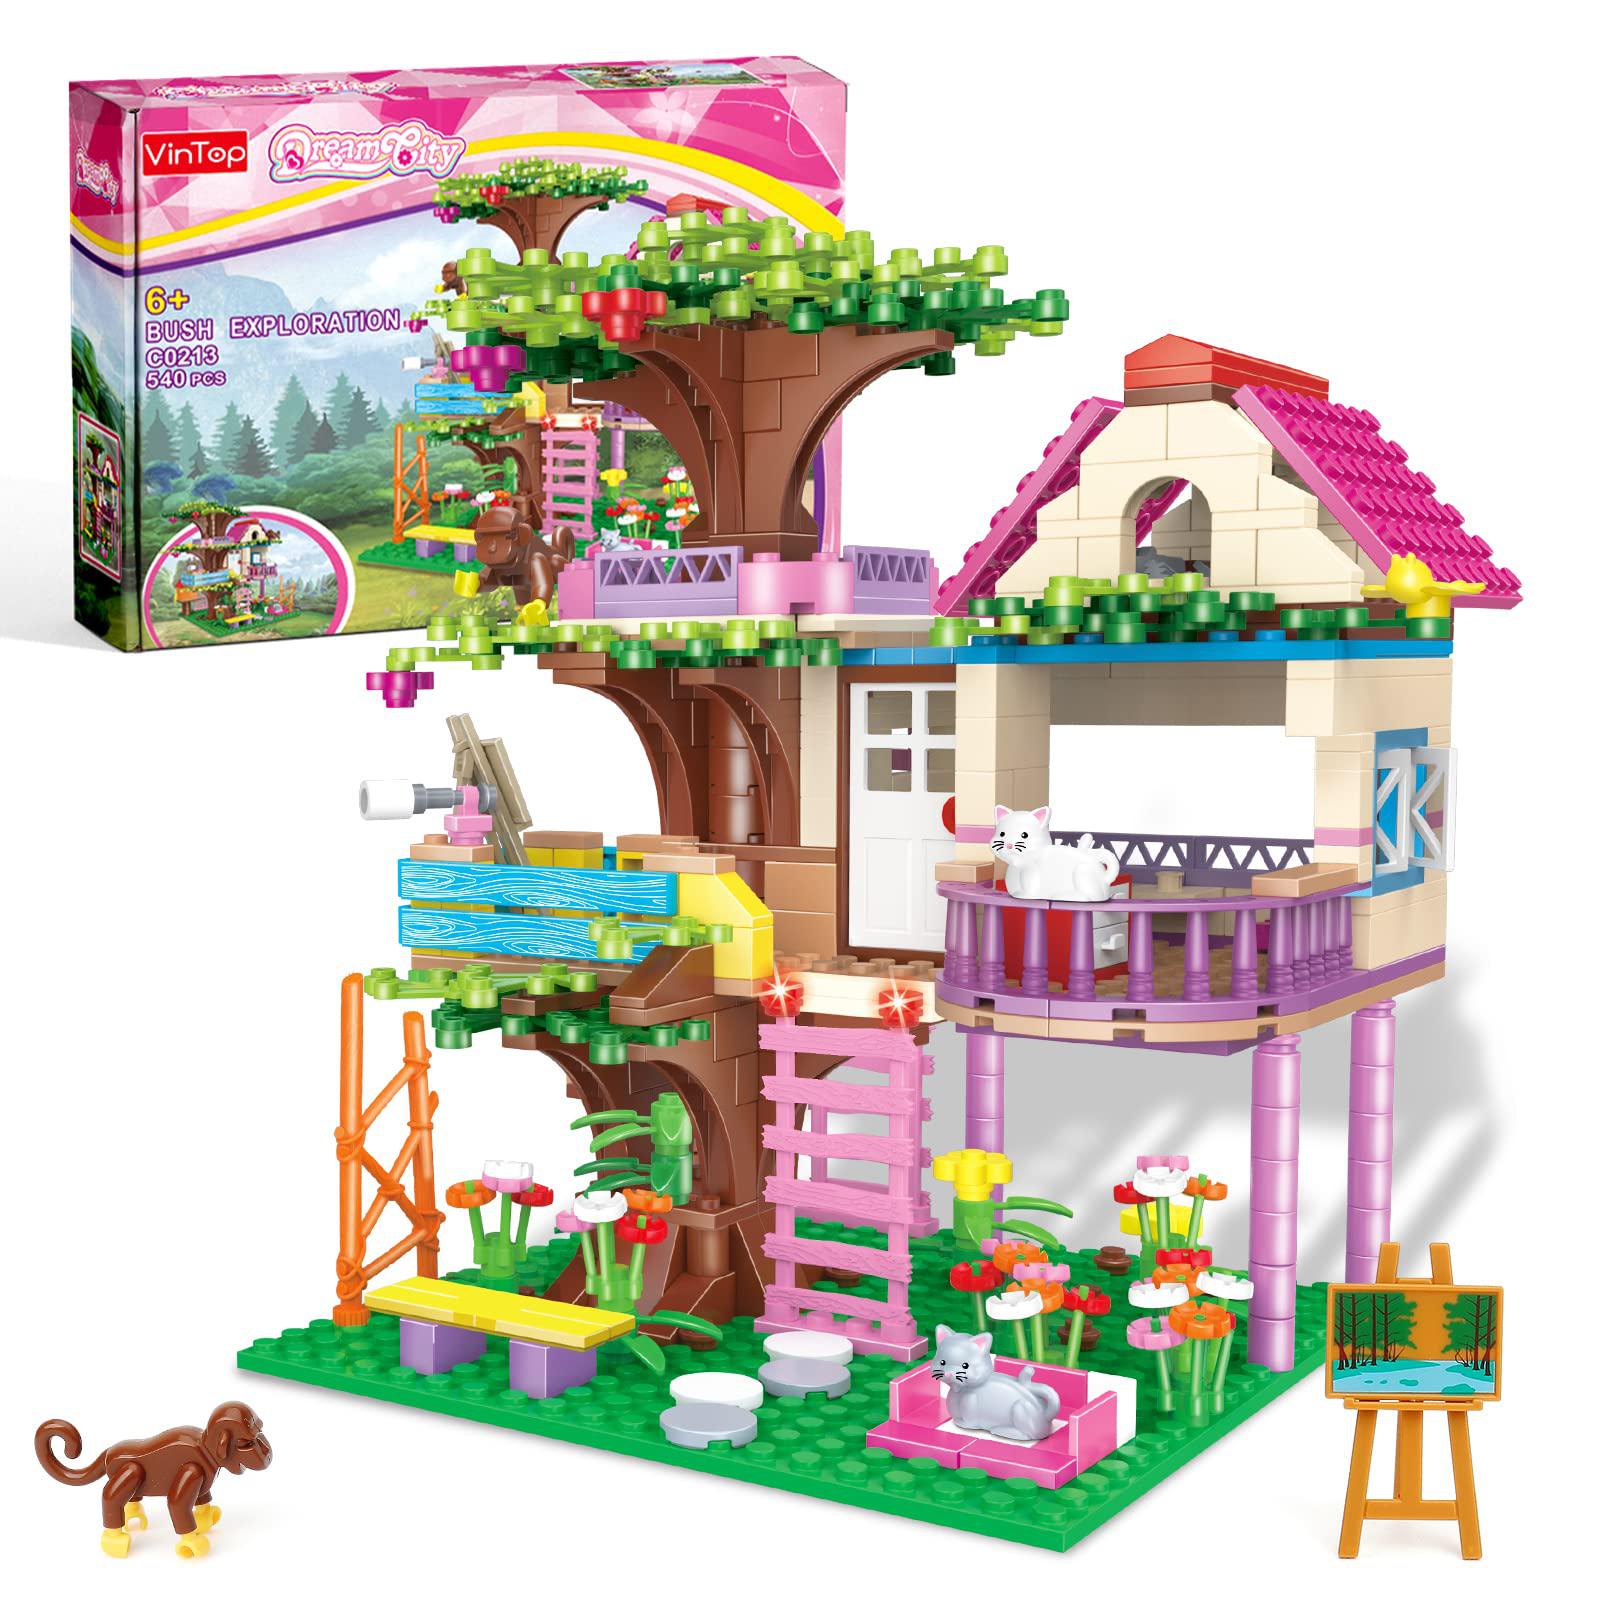 VINTOP vintop tree house stem building toys for girls 6 7 8 9 10 12 years  old, treehouse building sets for girls boys, 540pcs forest